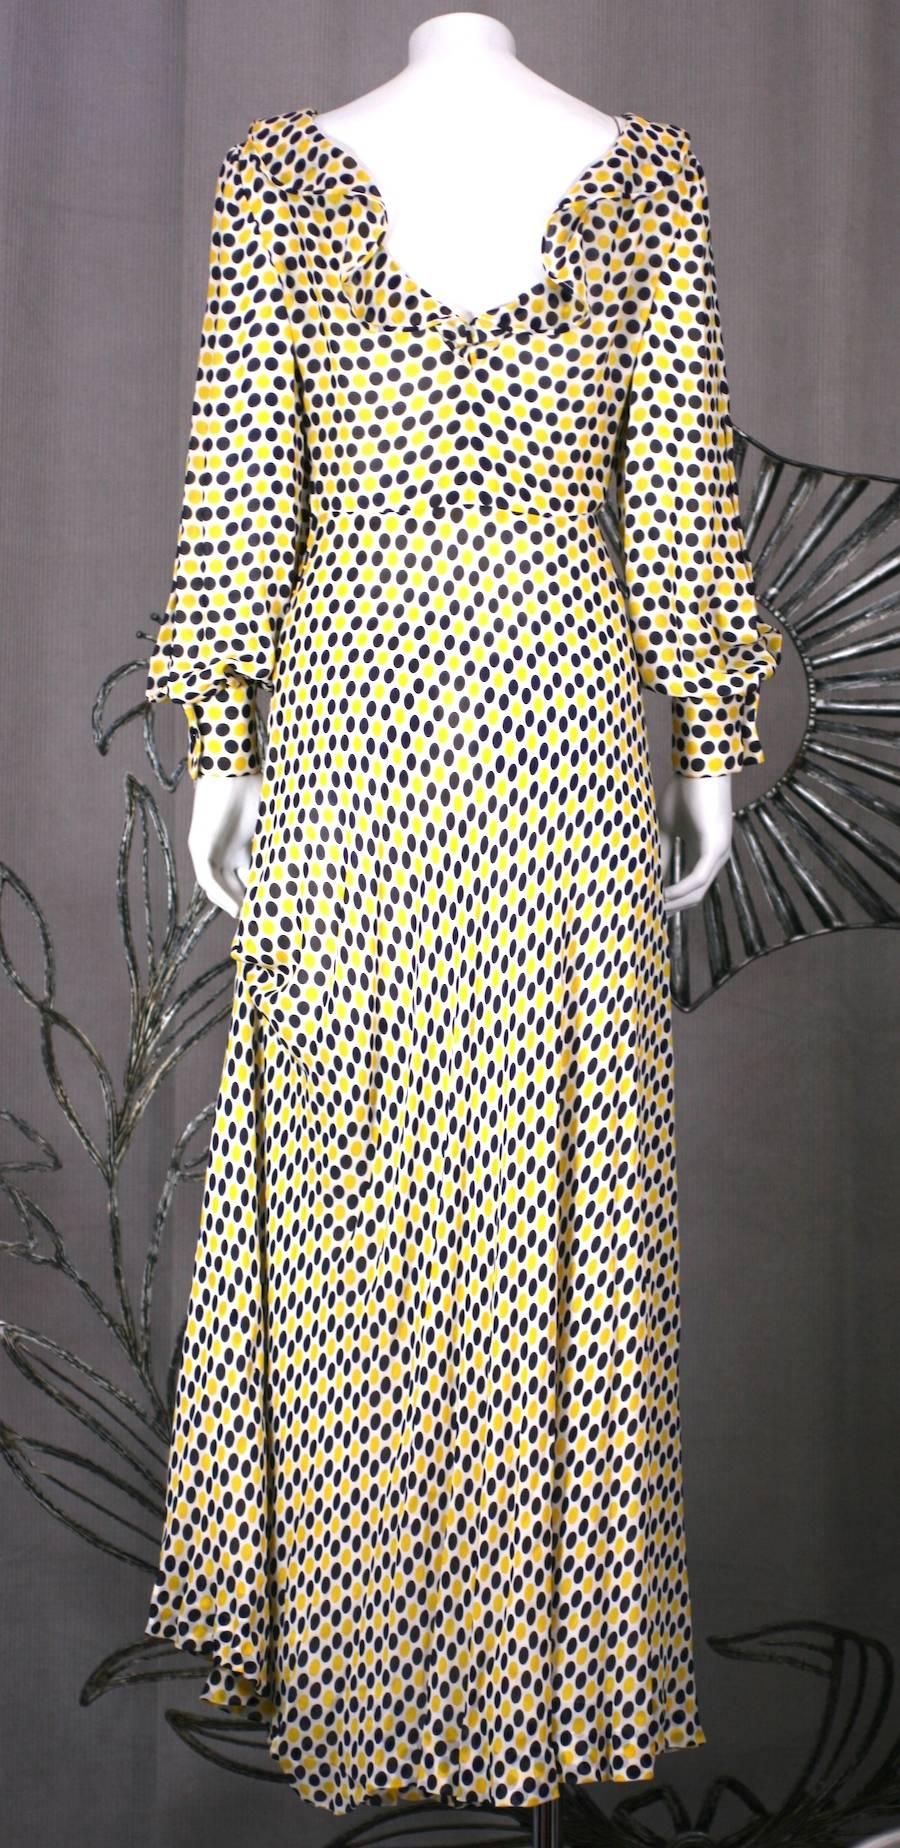 Galanos Yellow and Black Polka Dot Crepe Gown In Excellent Condition For Sale In New York, NY